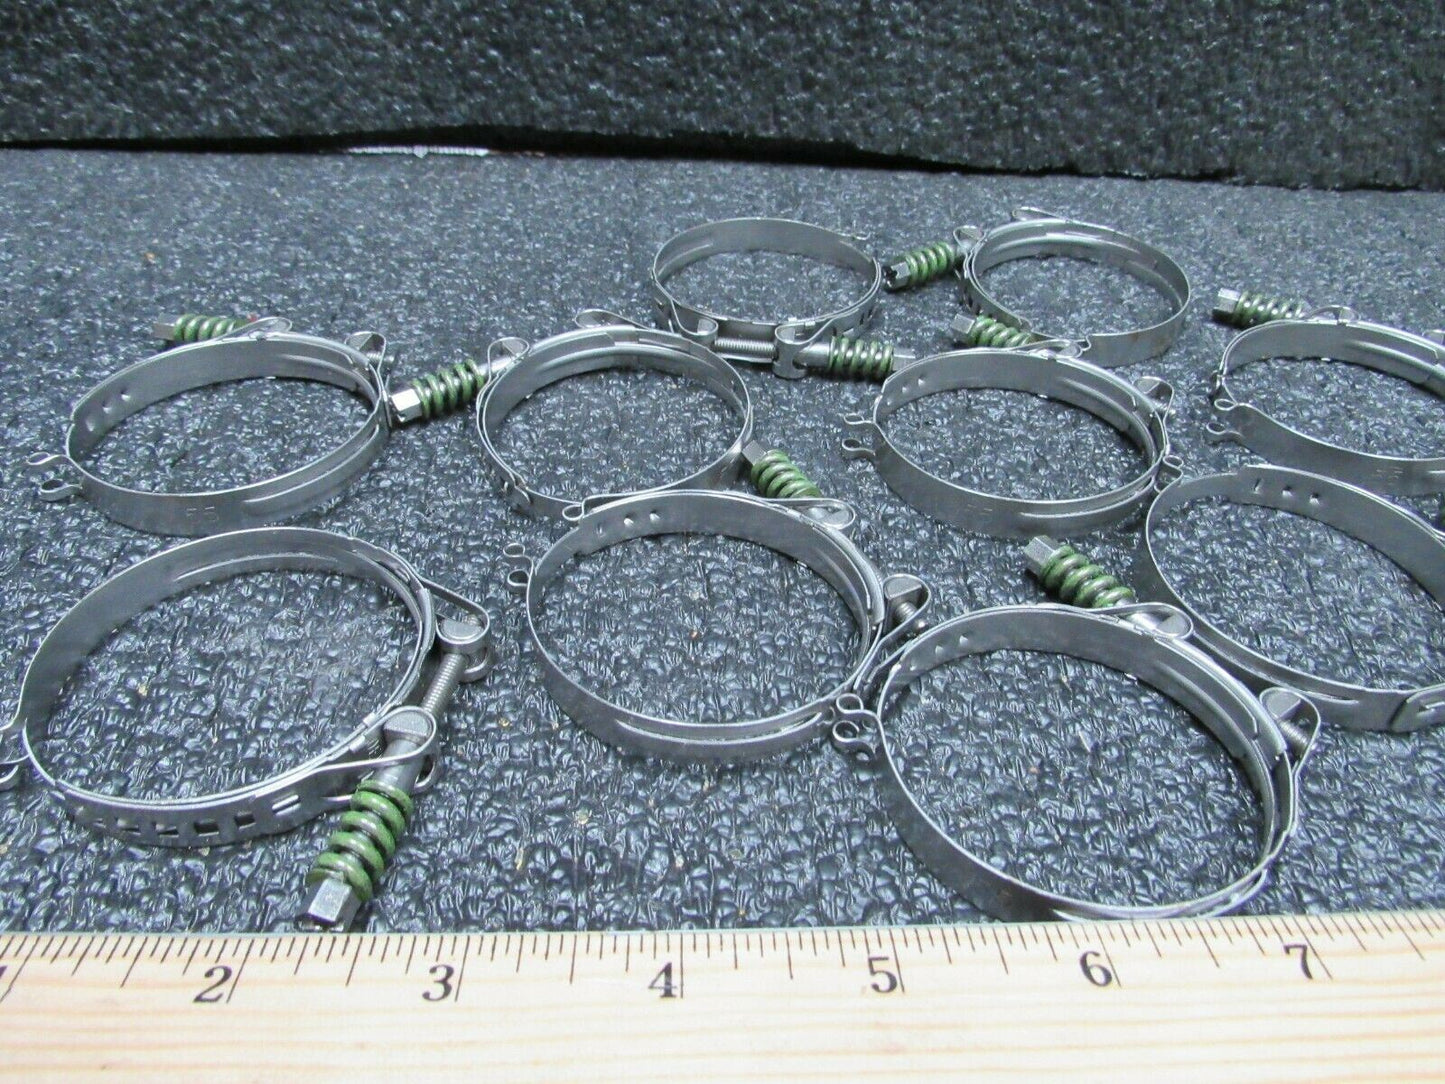 (10) Oetiker 055S9 17800179 Stainless Self-Tensioning Stepless Hose Clamp 55mm (184187227368-WTA07)